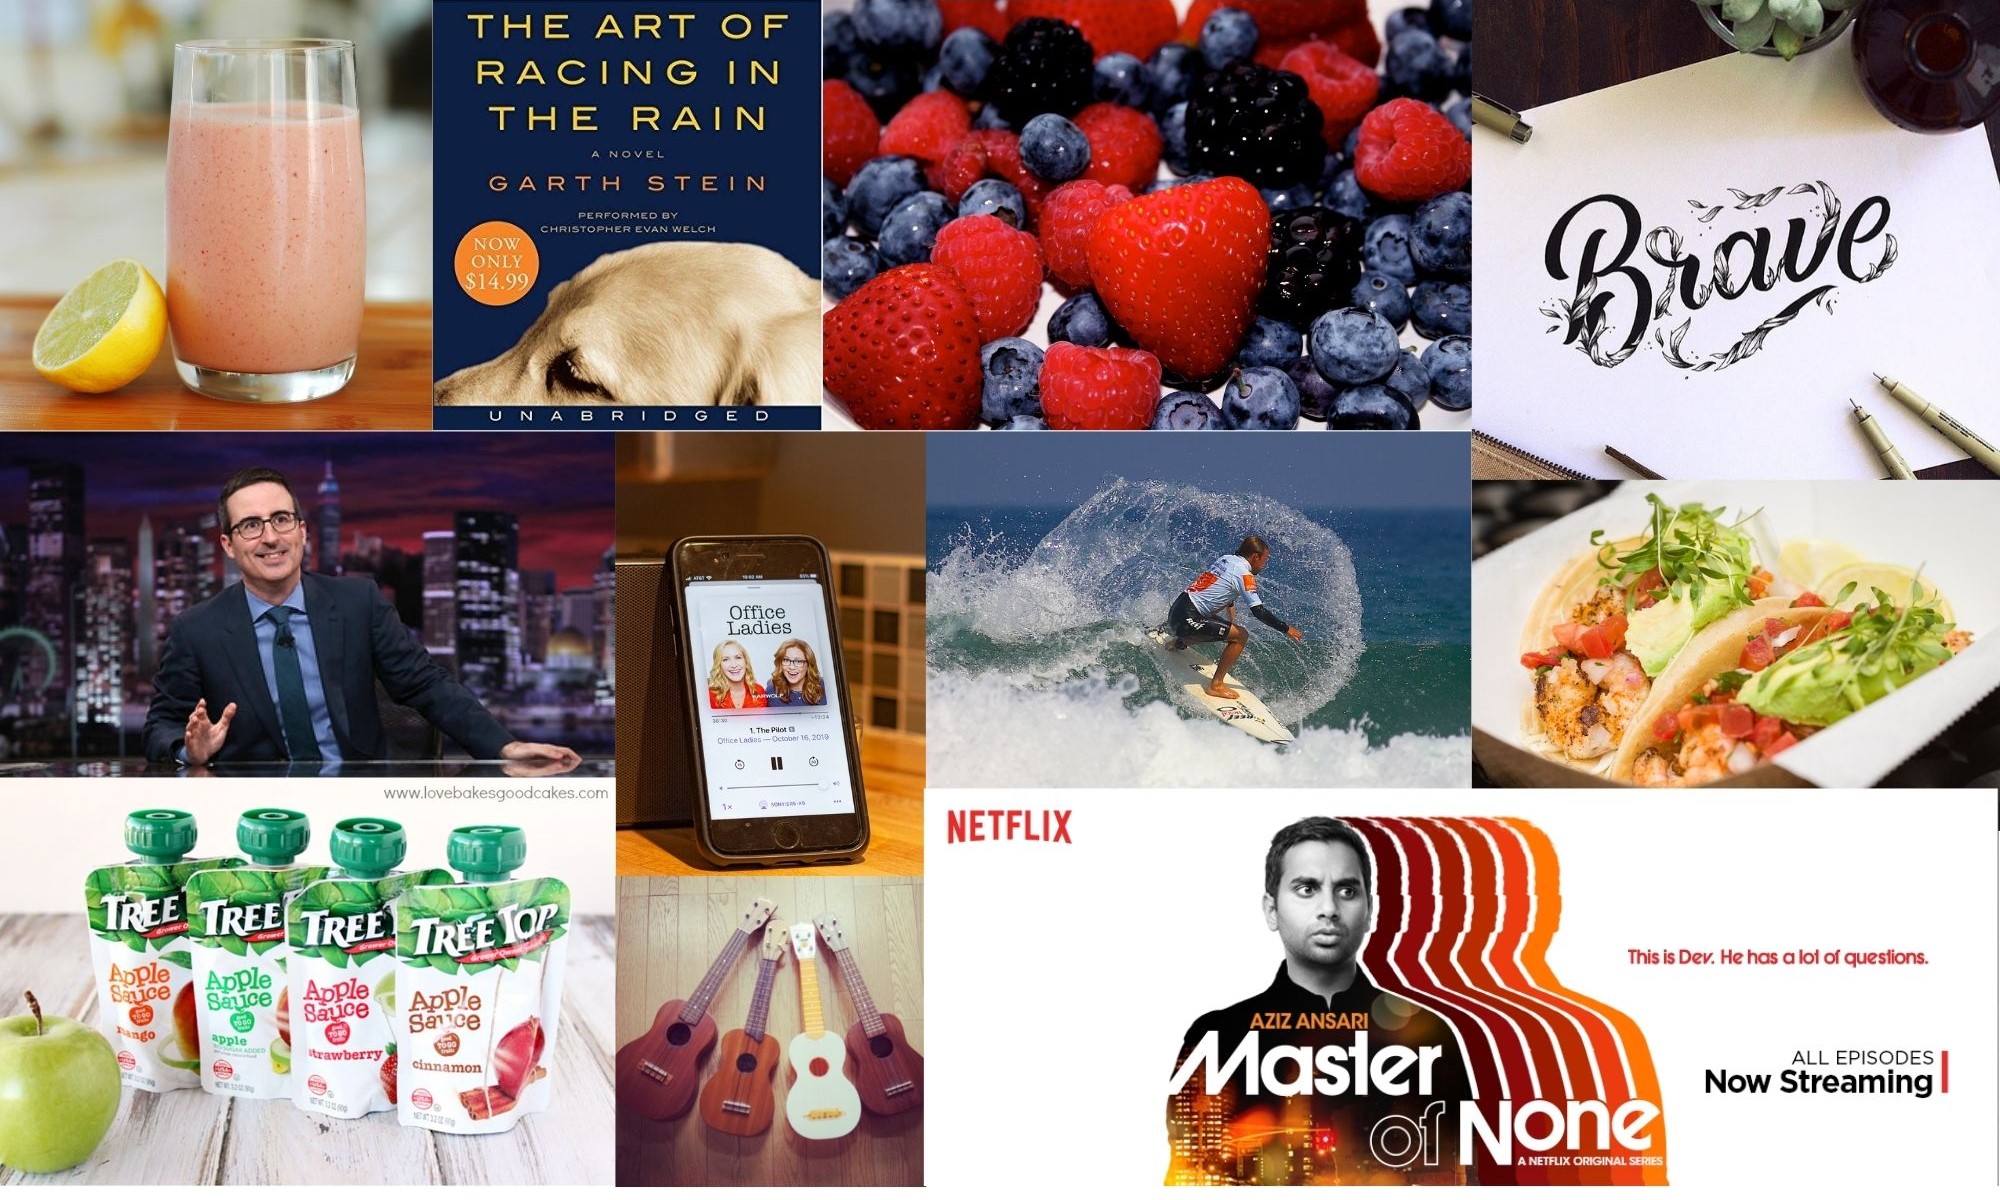 Collage of summer recommendations including drinks, music, books, fruits, and food items.